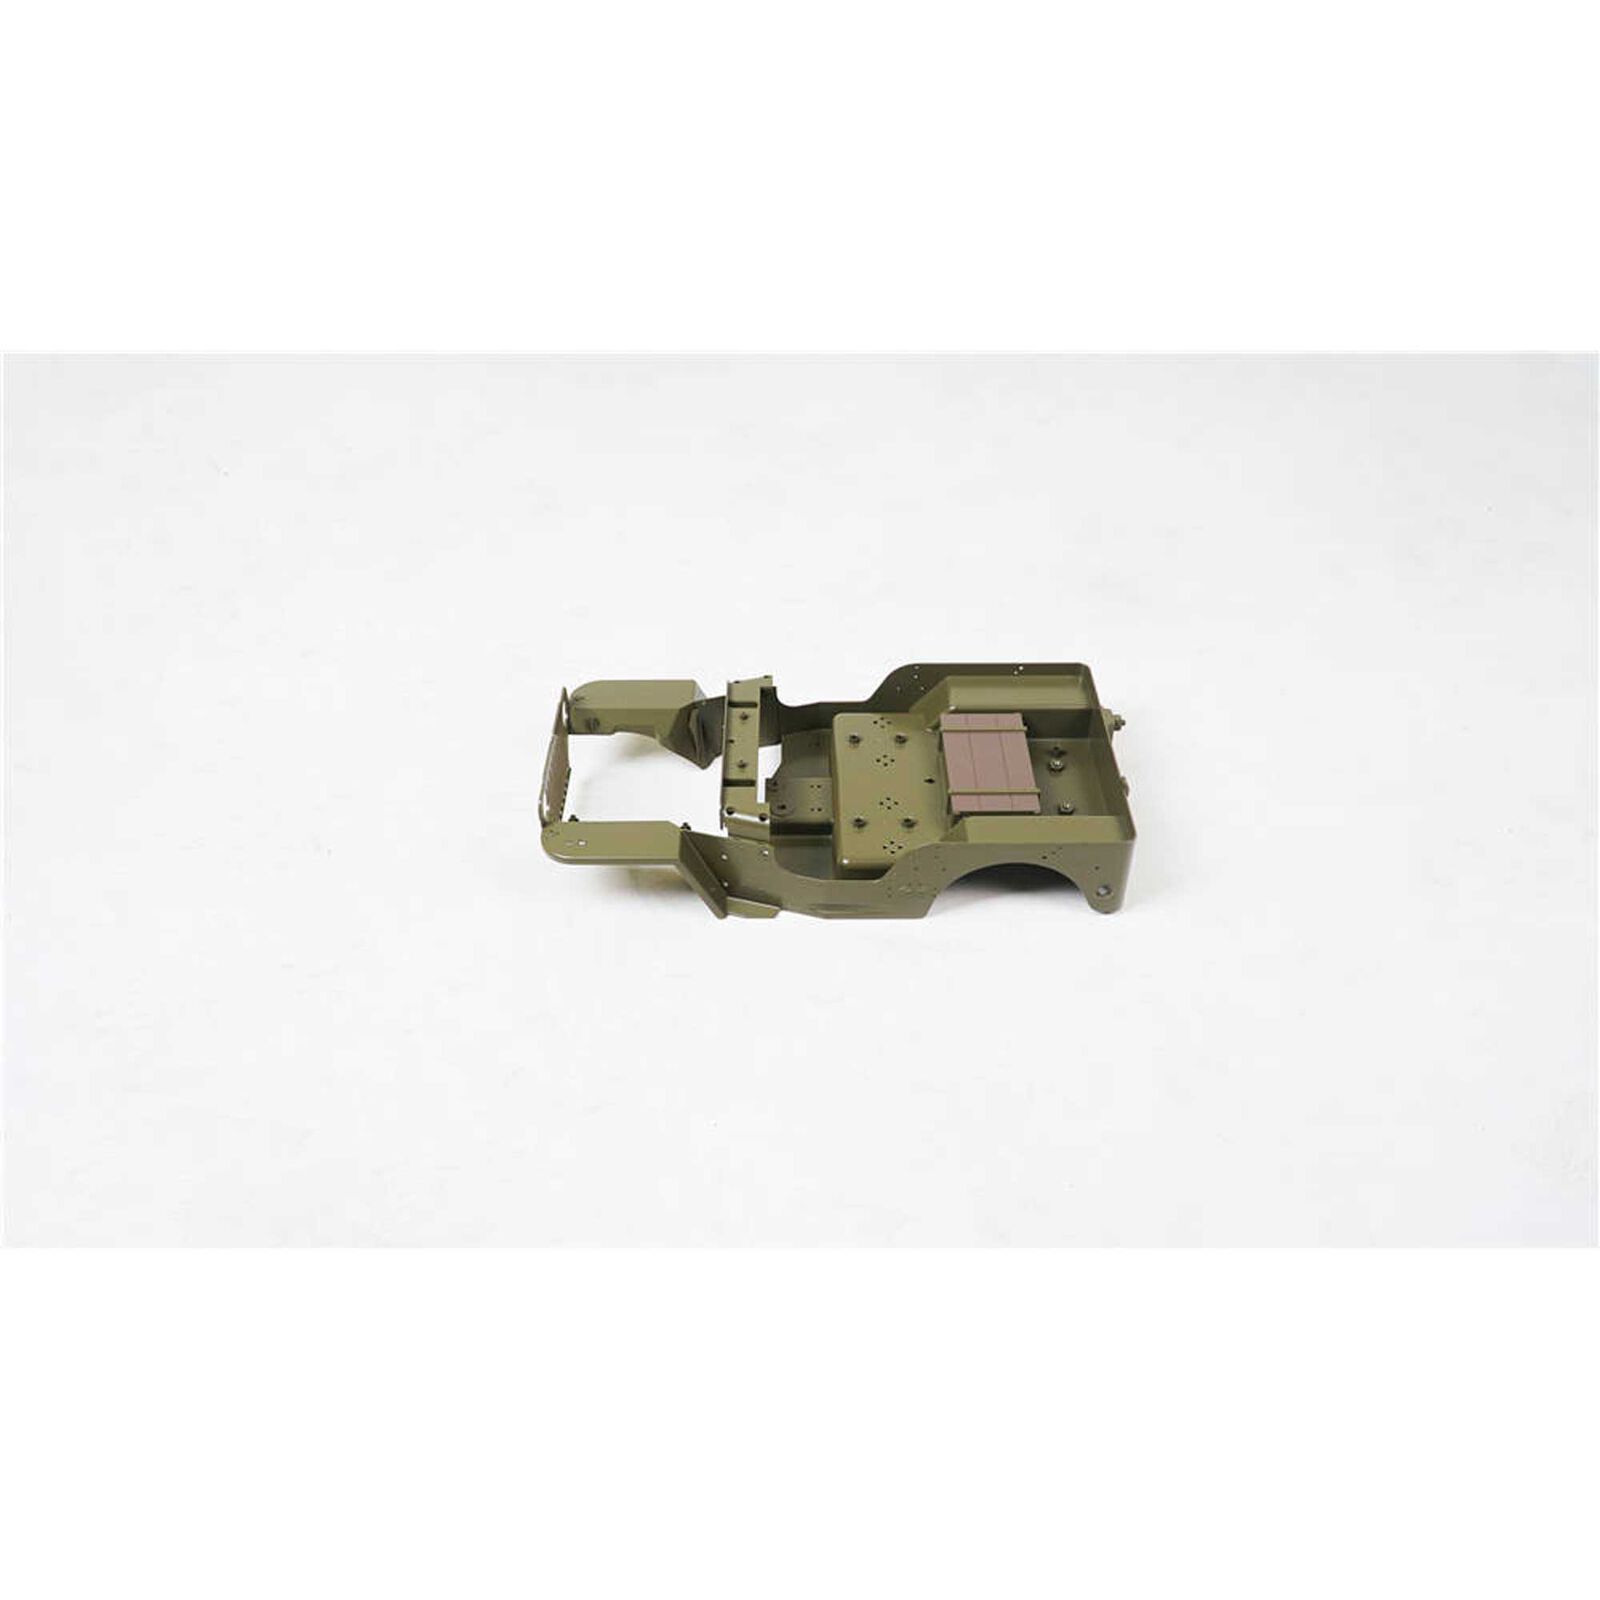 Body Shell: 1/6 MB Scaler